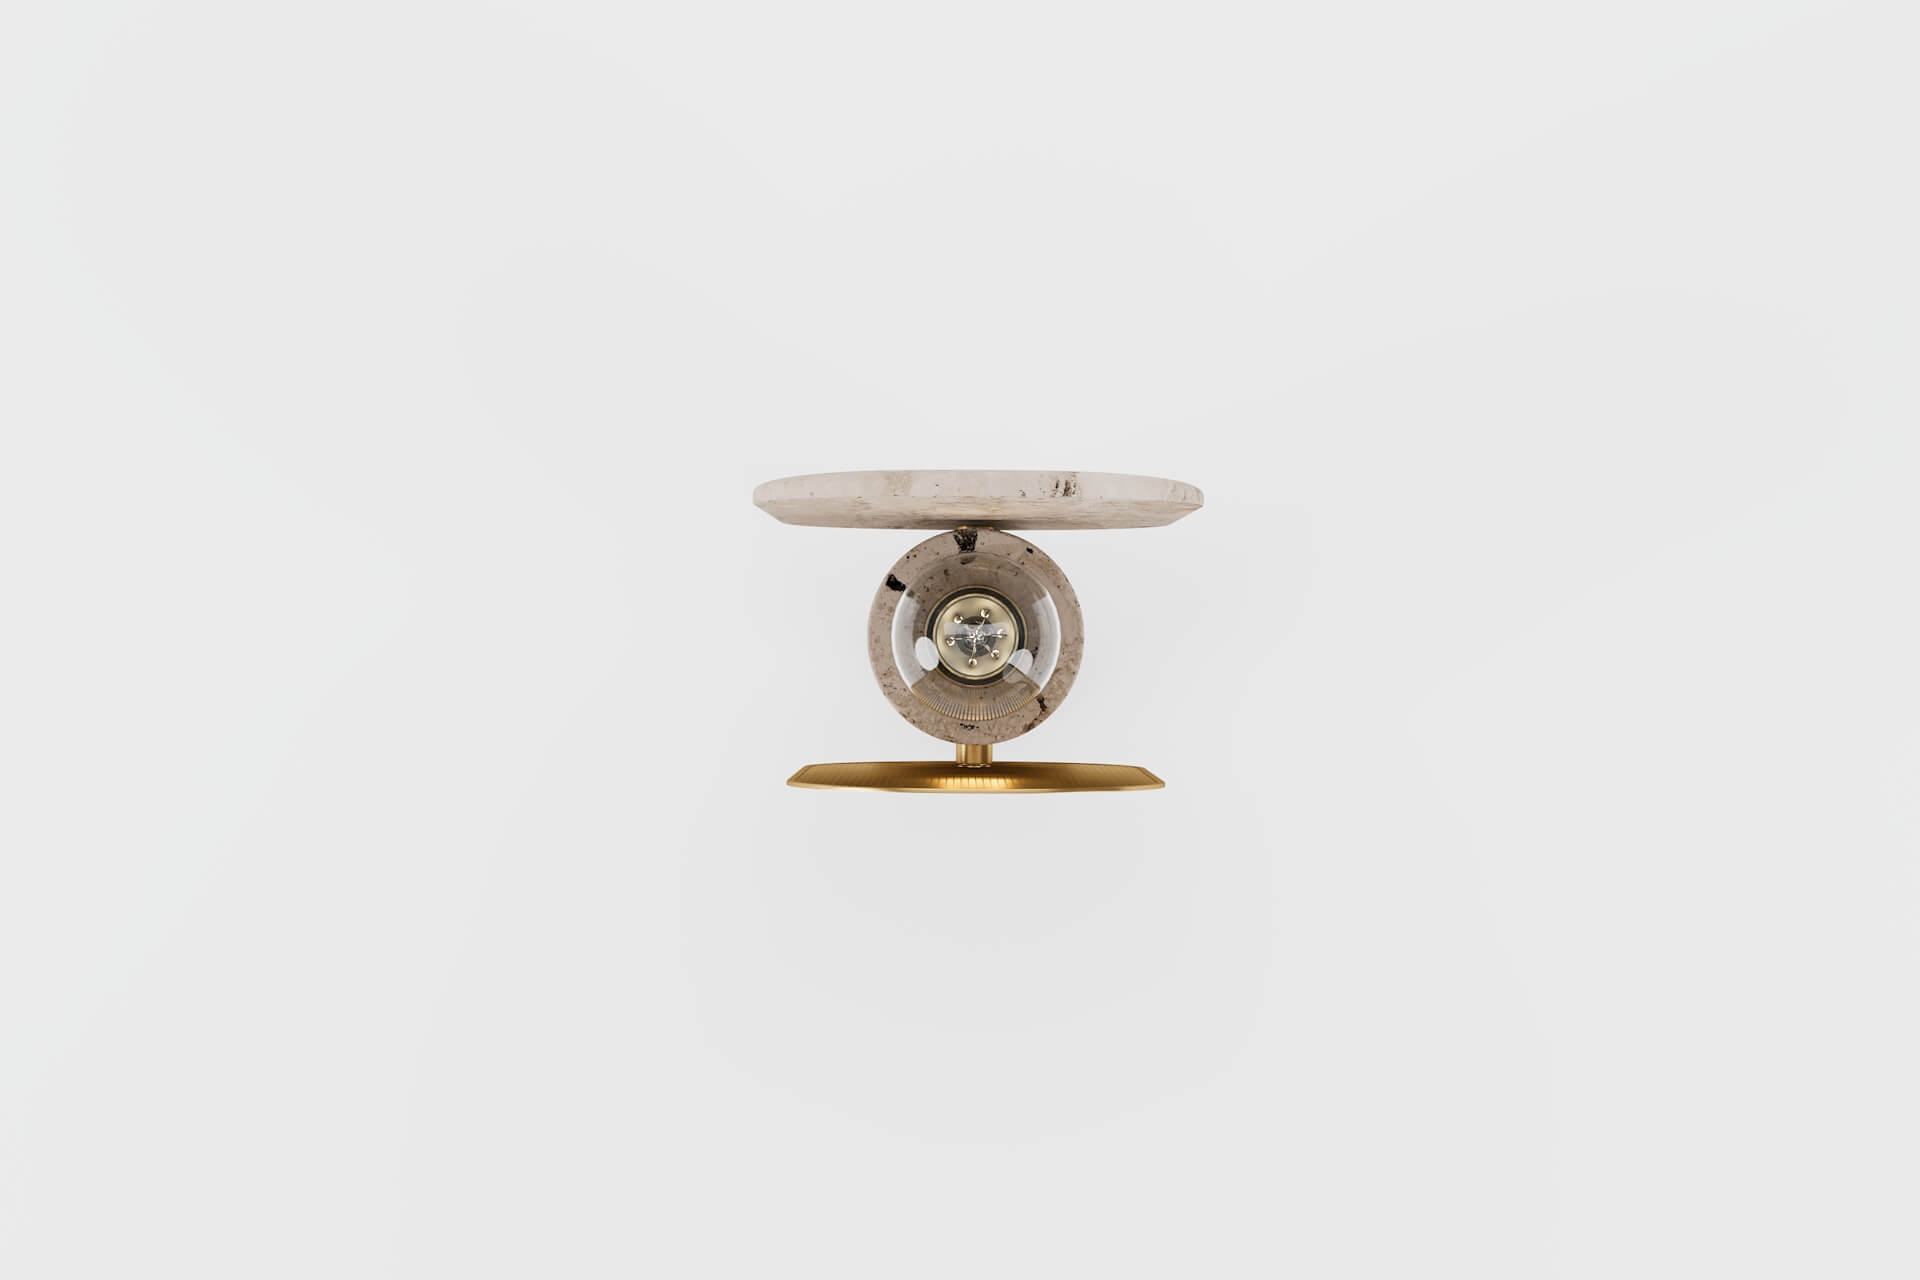 Overhead Angle for a Close-Up Lamp 3D Rendering